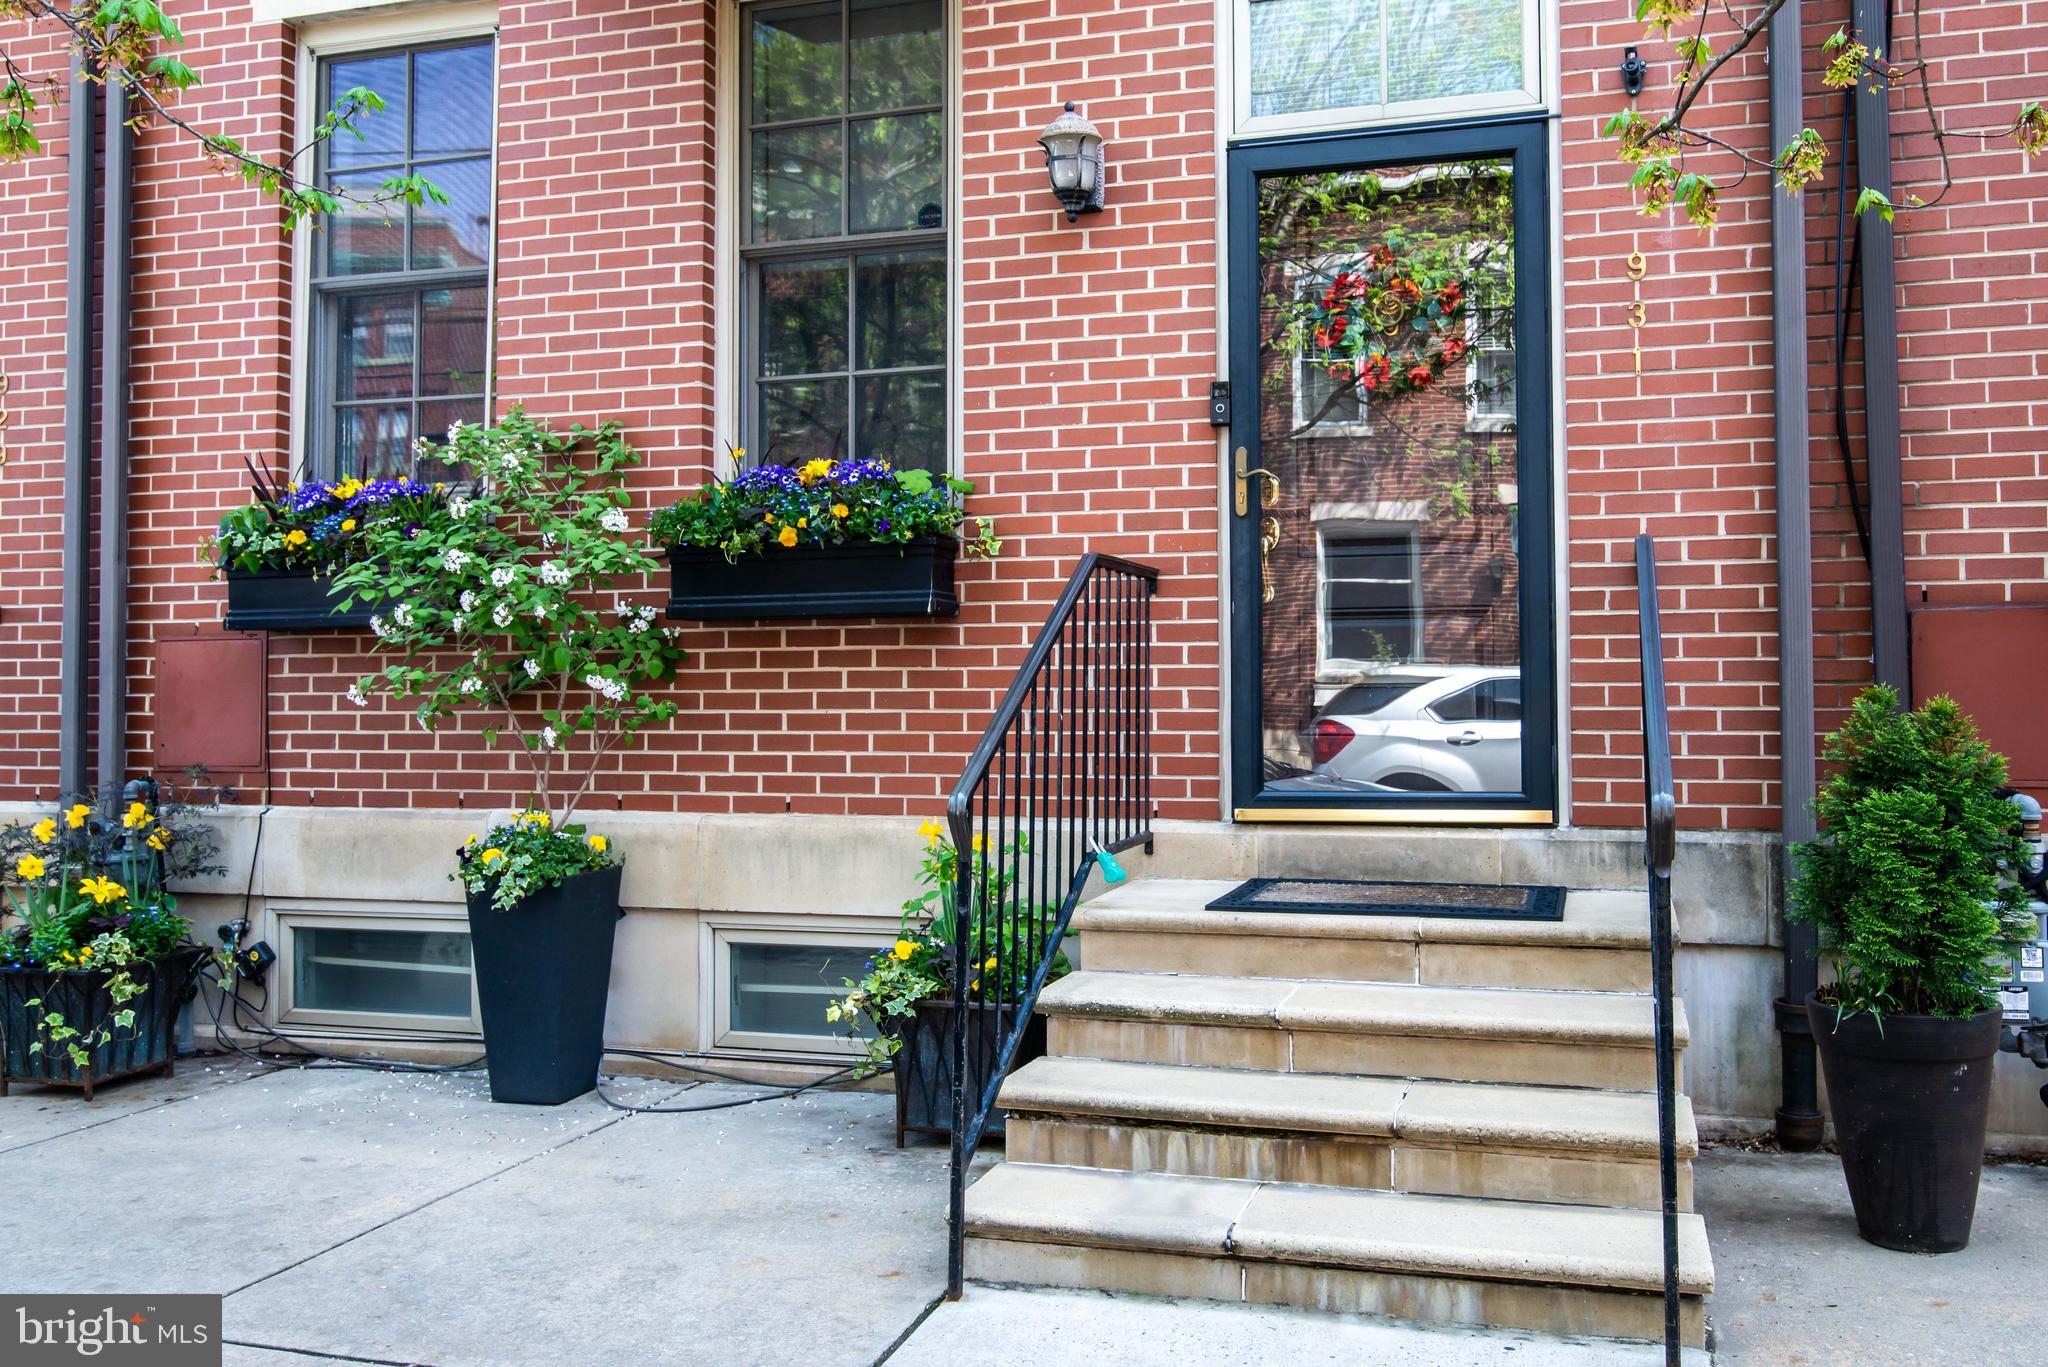 a view of a house with potted plants